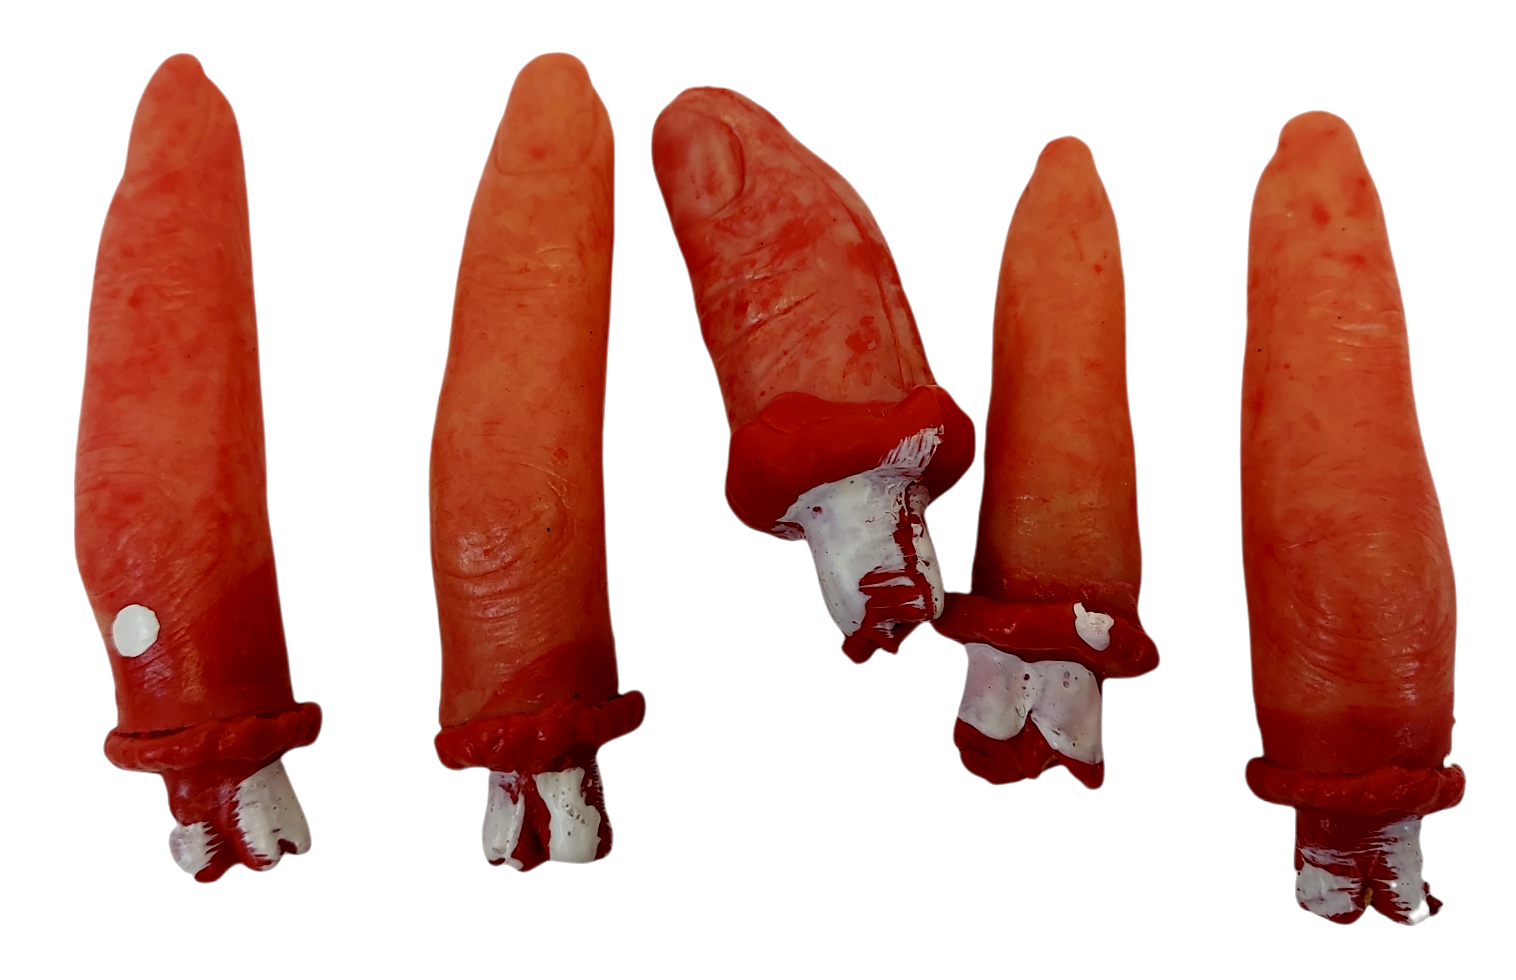 Lot of 5 Rubber Plastic Bloody Fingers Halloween Decorations FRE